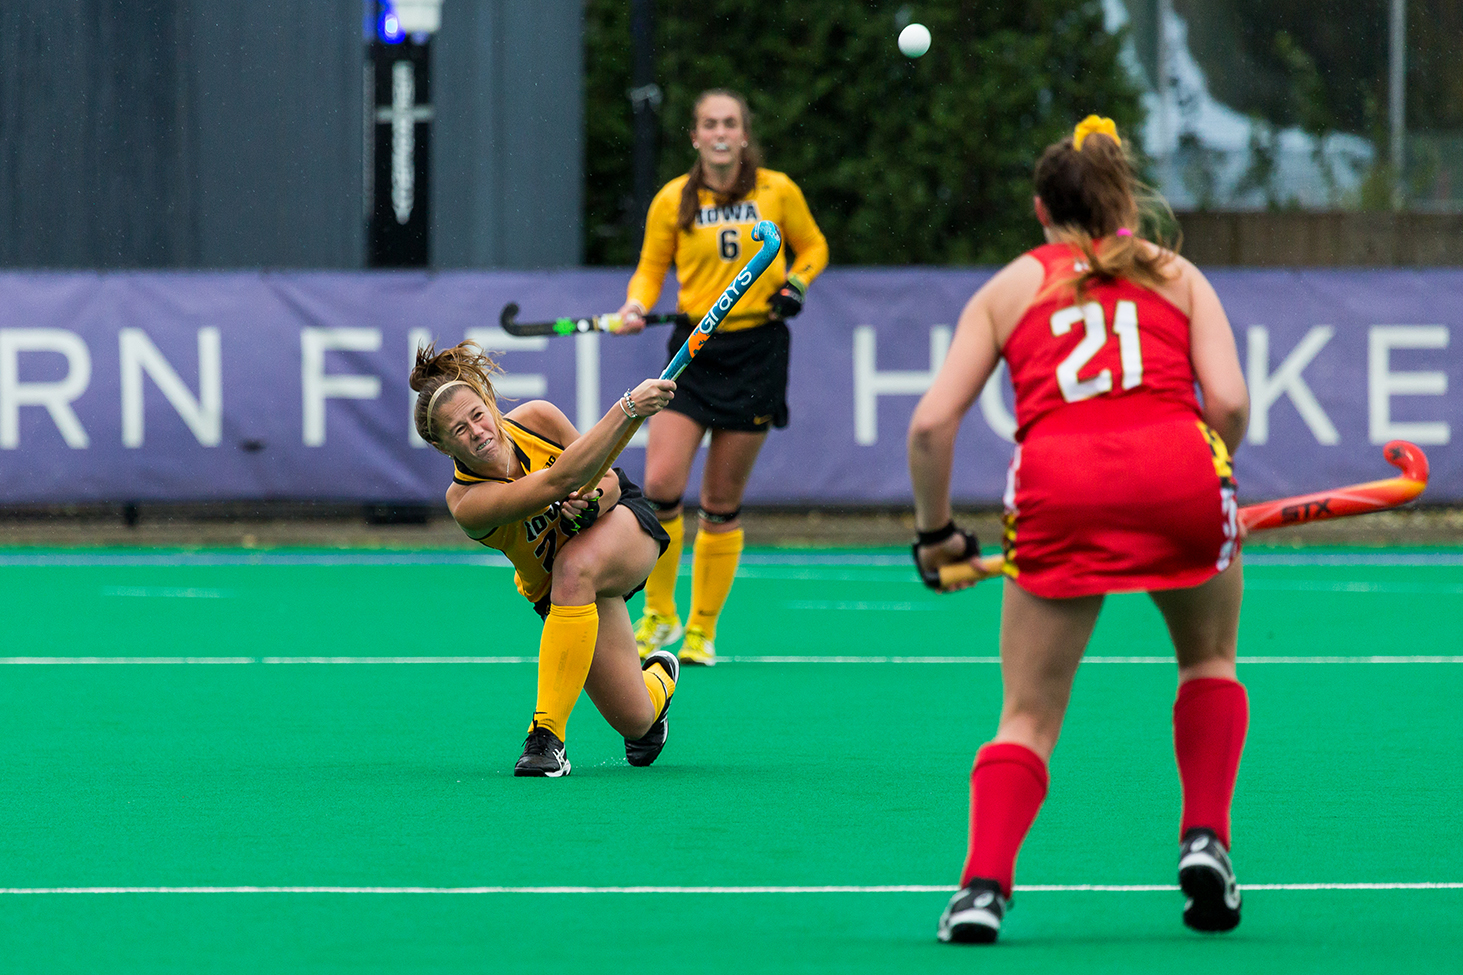  Iowa midfielder Sophie Sunderland lofts the ball during the Championship Game in the Big Ten Field Hockey Tournament at Lakeside Field in Evanston, IL on Sunday, Nov. 3, 2018. The no. 2 ranked Terrapins defeated the no. 8 ranked Hawkeyes 2-1.  